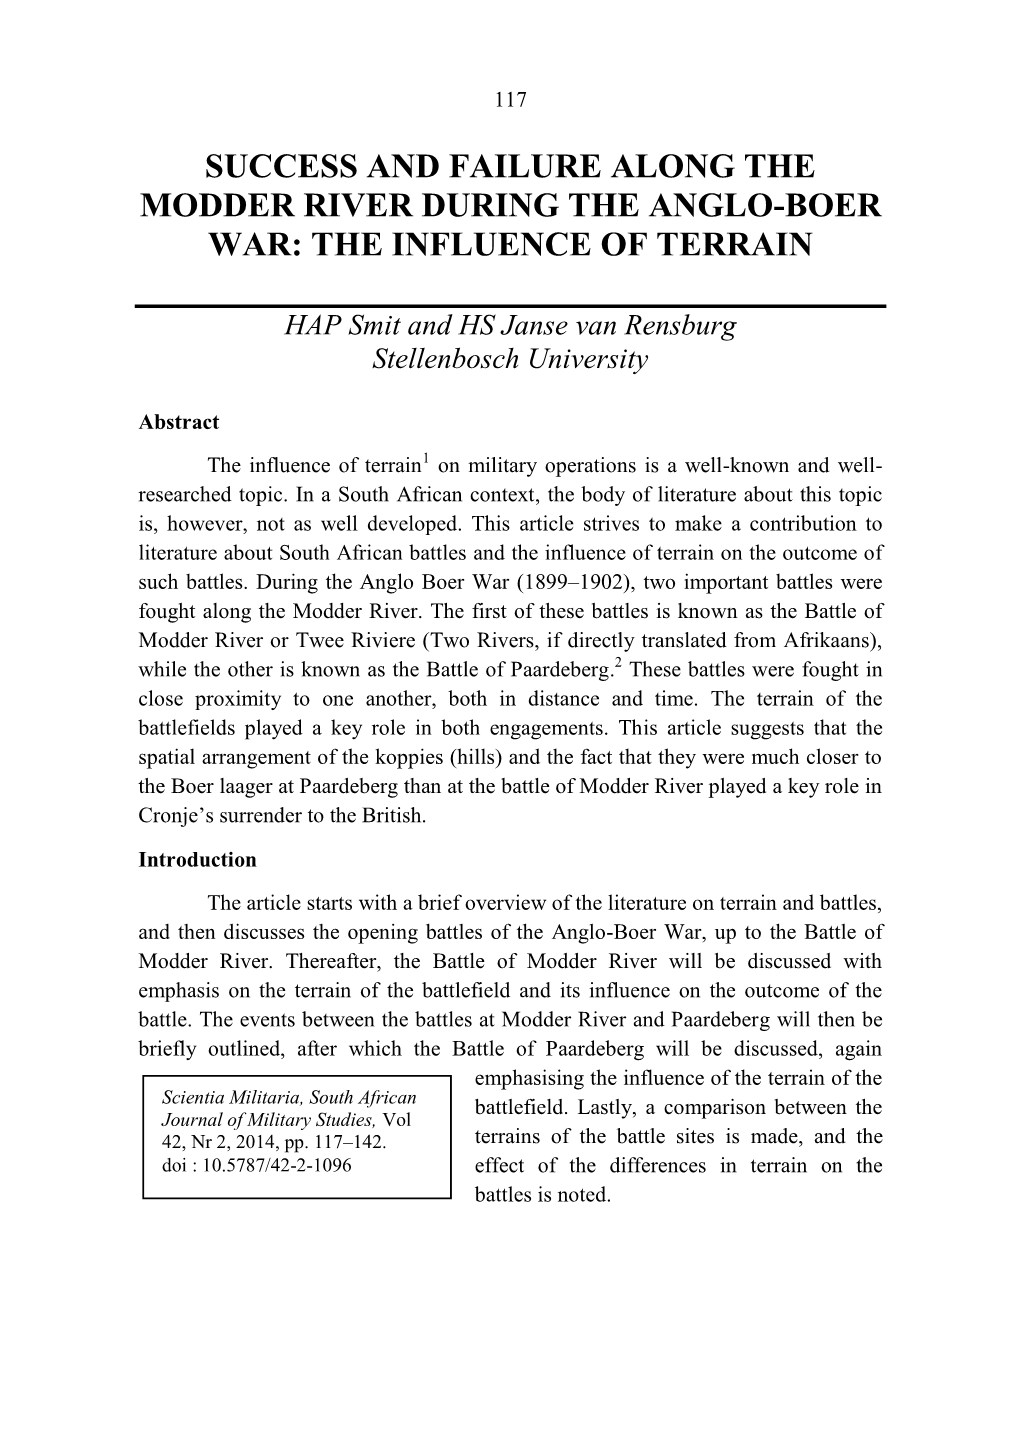 Success and Failure Along the Modder River During the Anglo-Boer War: the Influence of Terrain